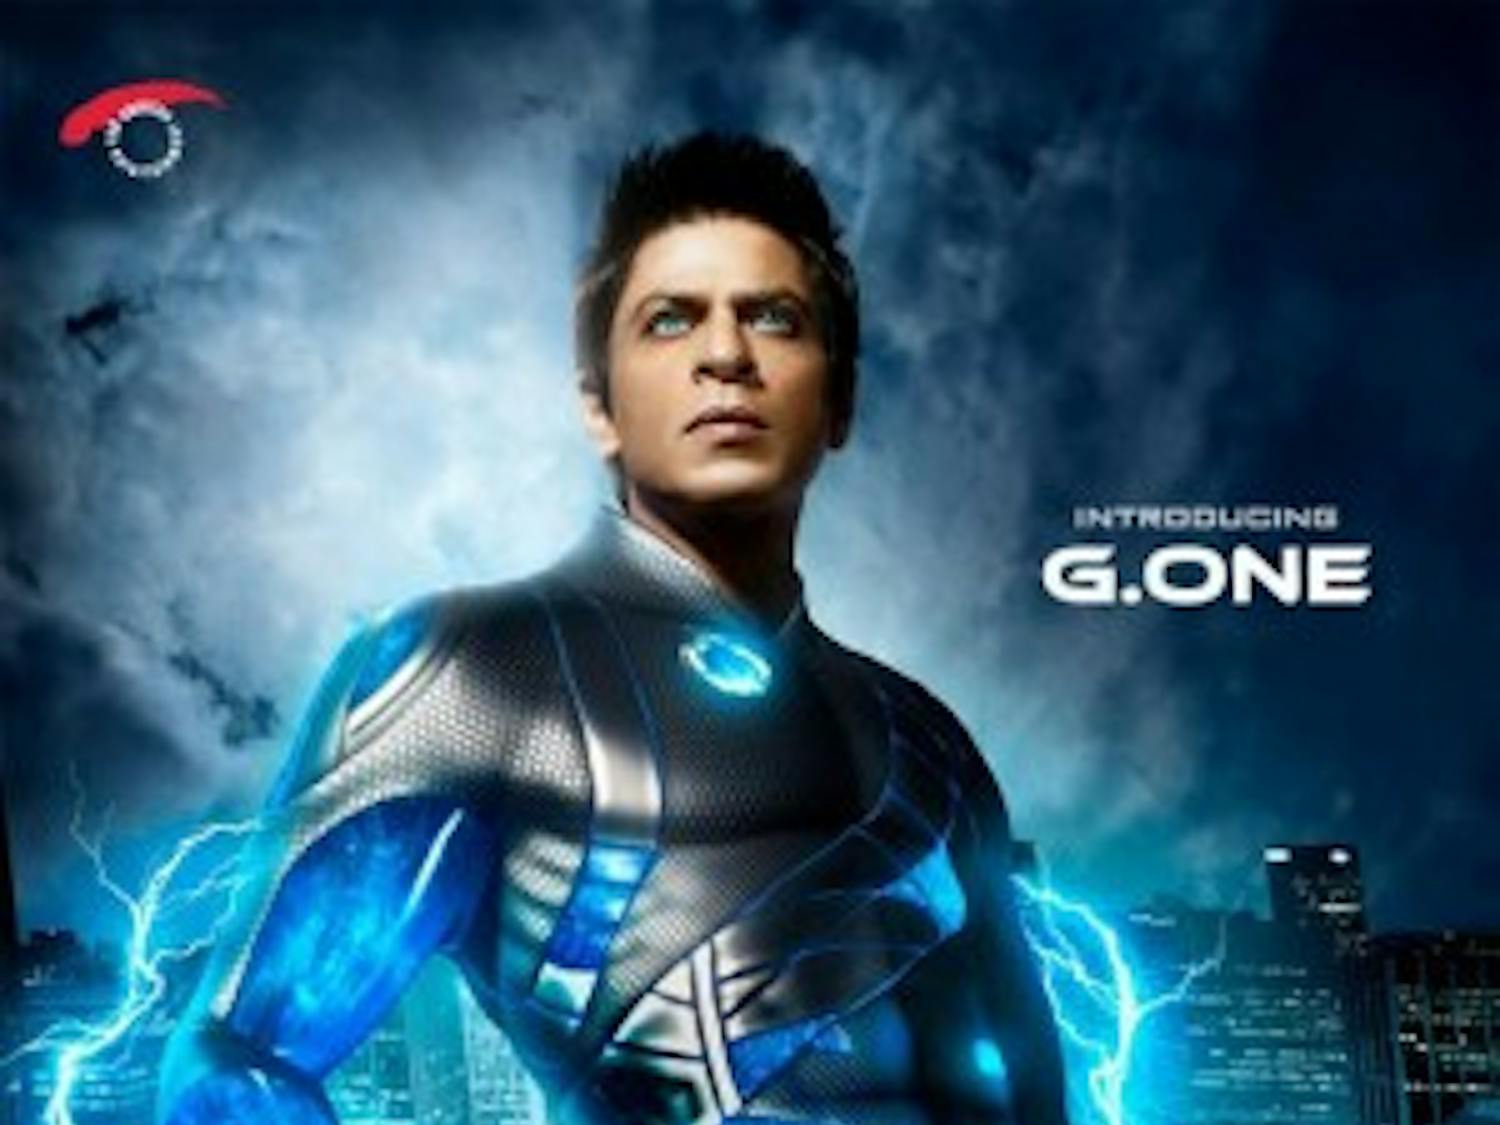 "Ra.One" released Wednesday amid a swarm of hype. It delivers the action, visual effects and morality promised but suffers from some plot holes and a disjointed beginning.